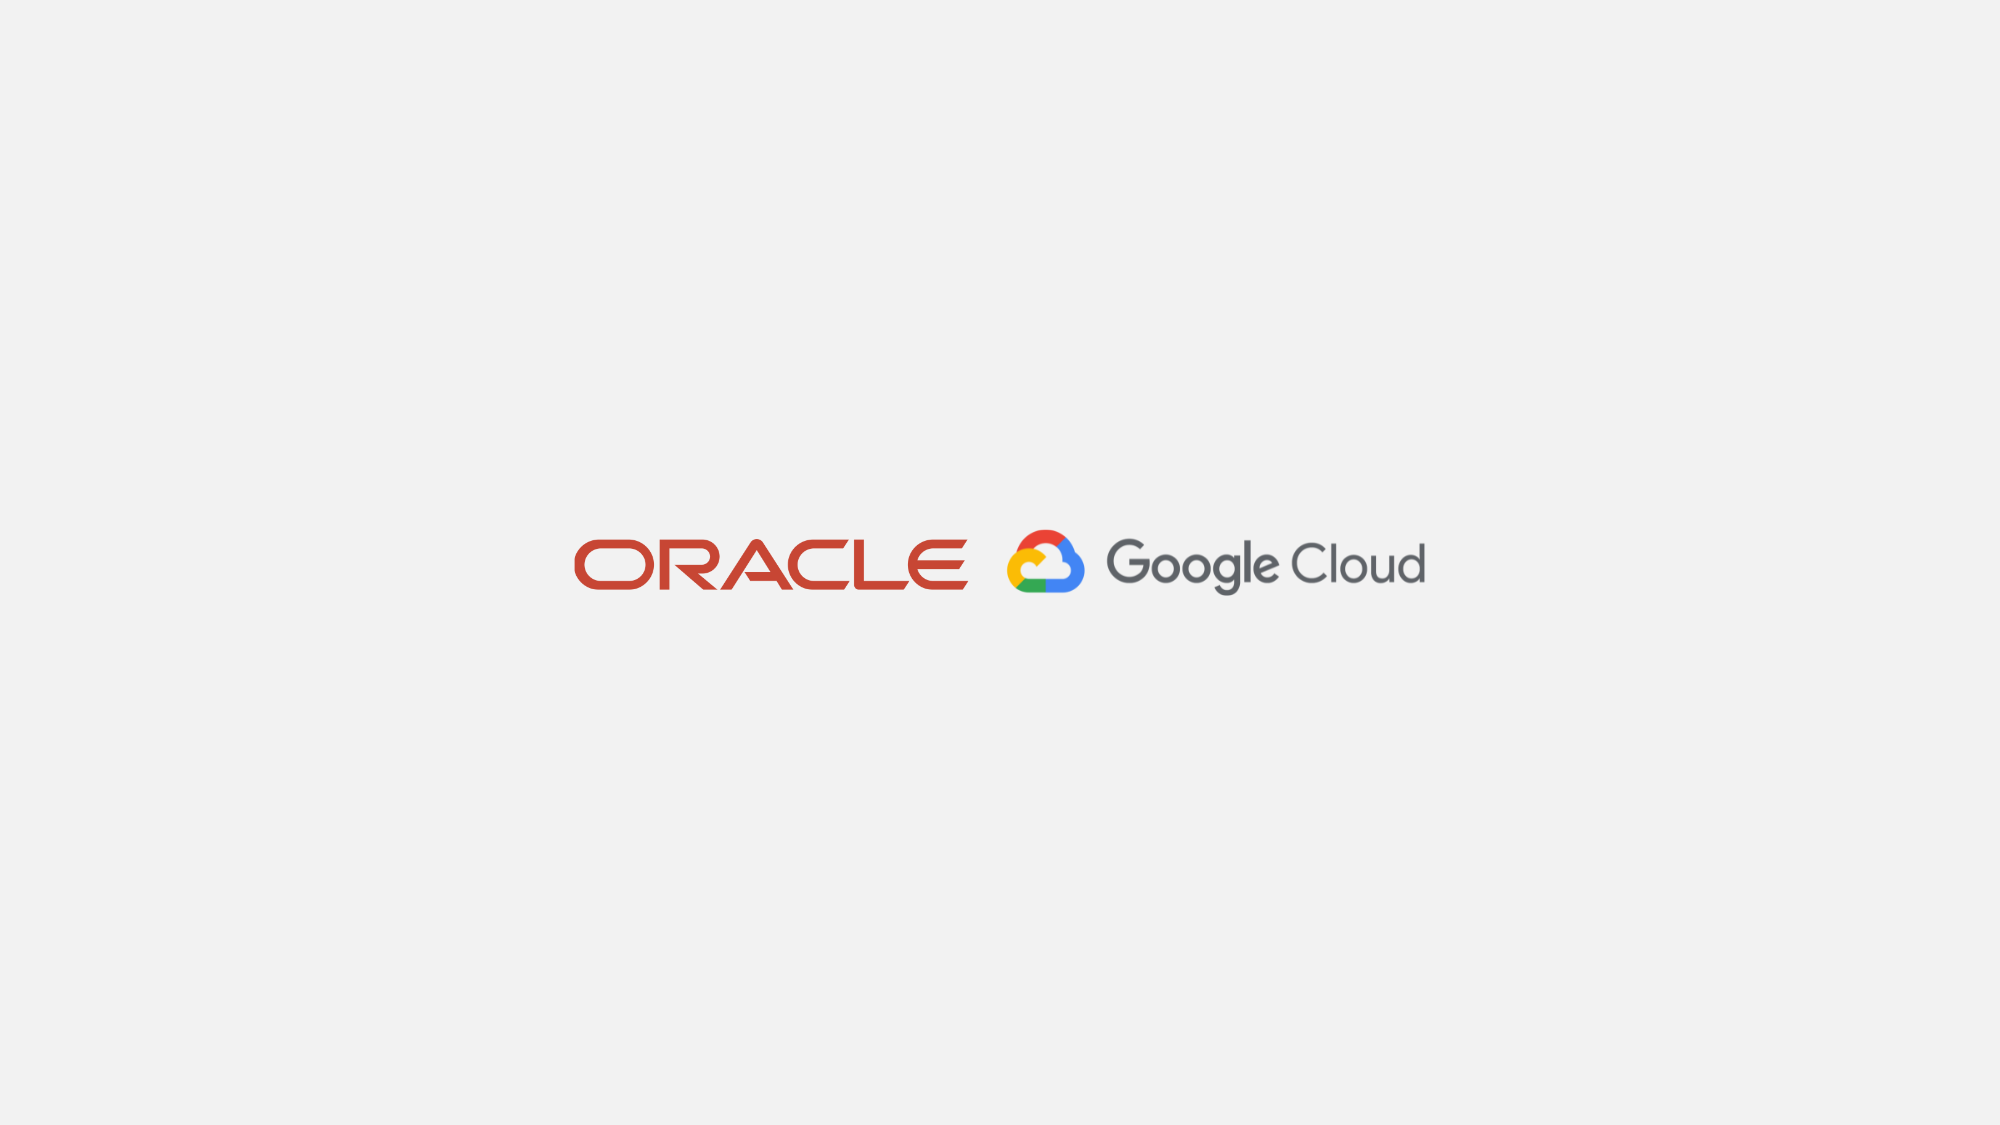 Oracle Database@Google Cloud – 6 reasons this is a big announcement